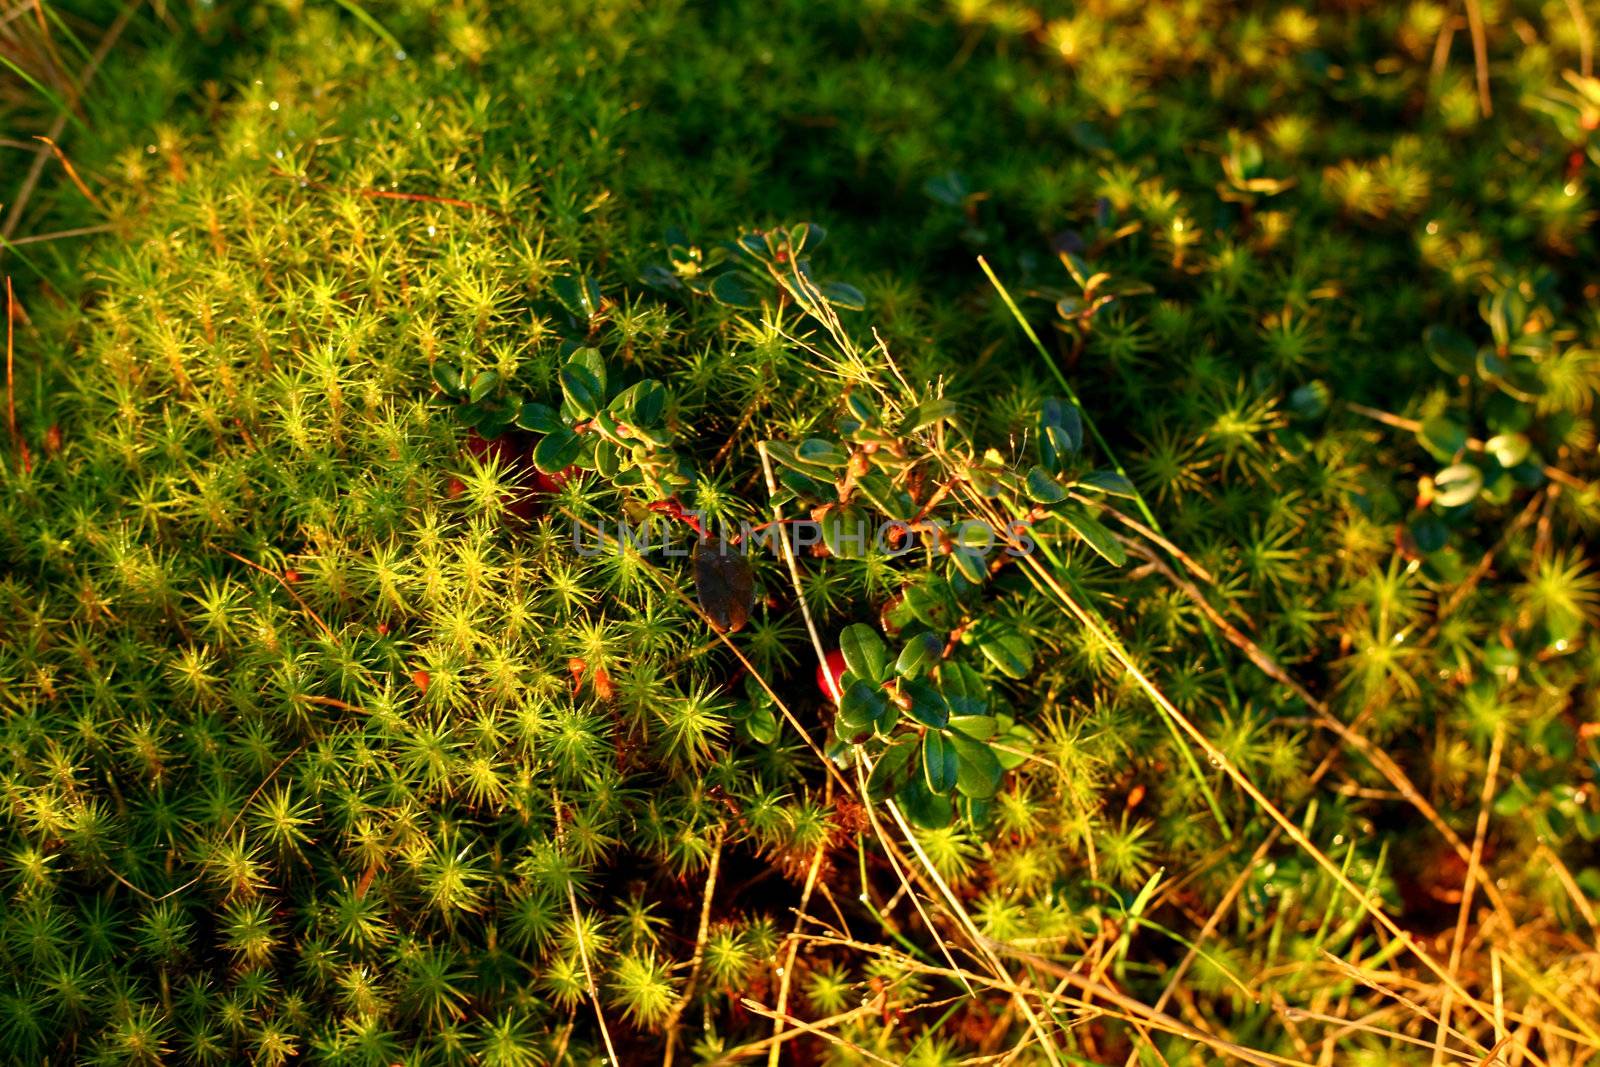 Stock photo: nature: an image of green moss